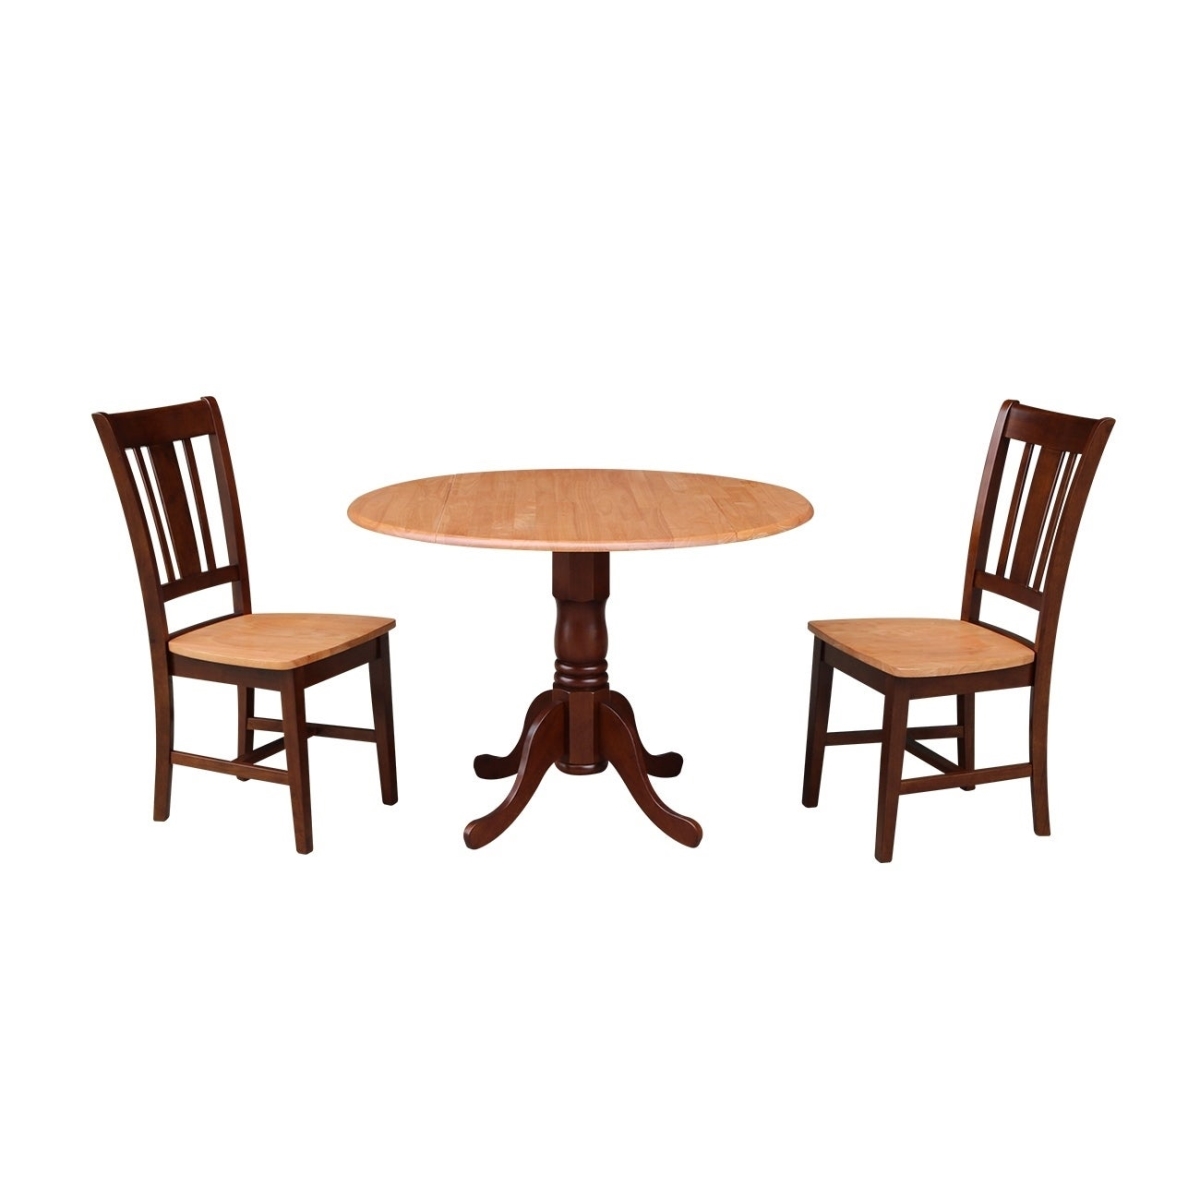 K58-42dp-c10 42 In. Dual Drop Leaf Table With 2 San Remo Chairs, Cinnamon & Espresso